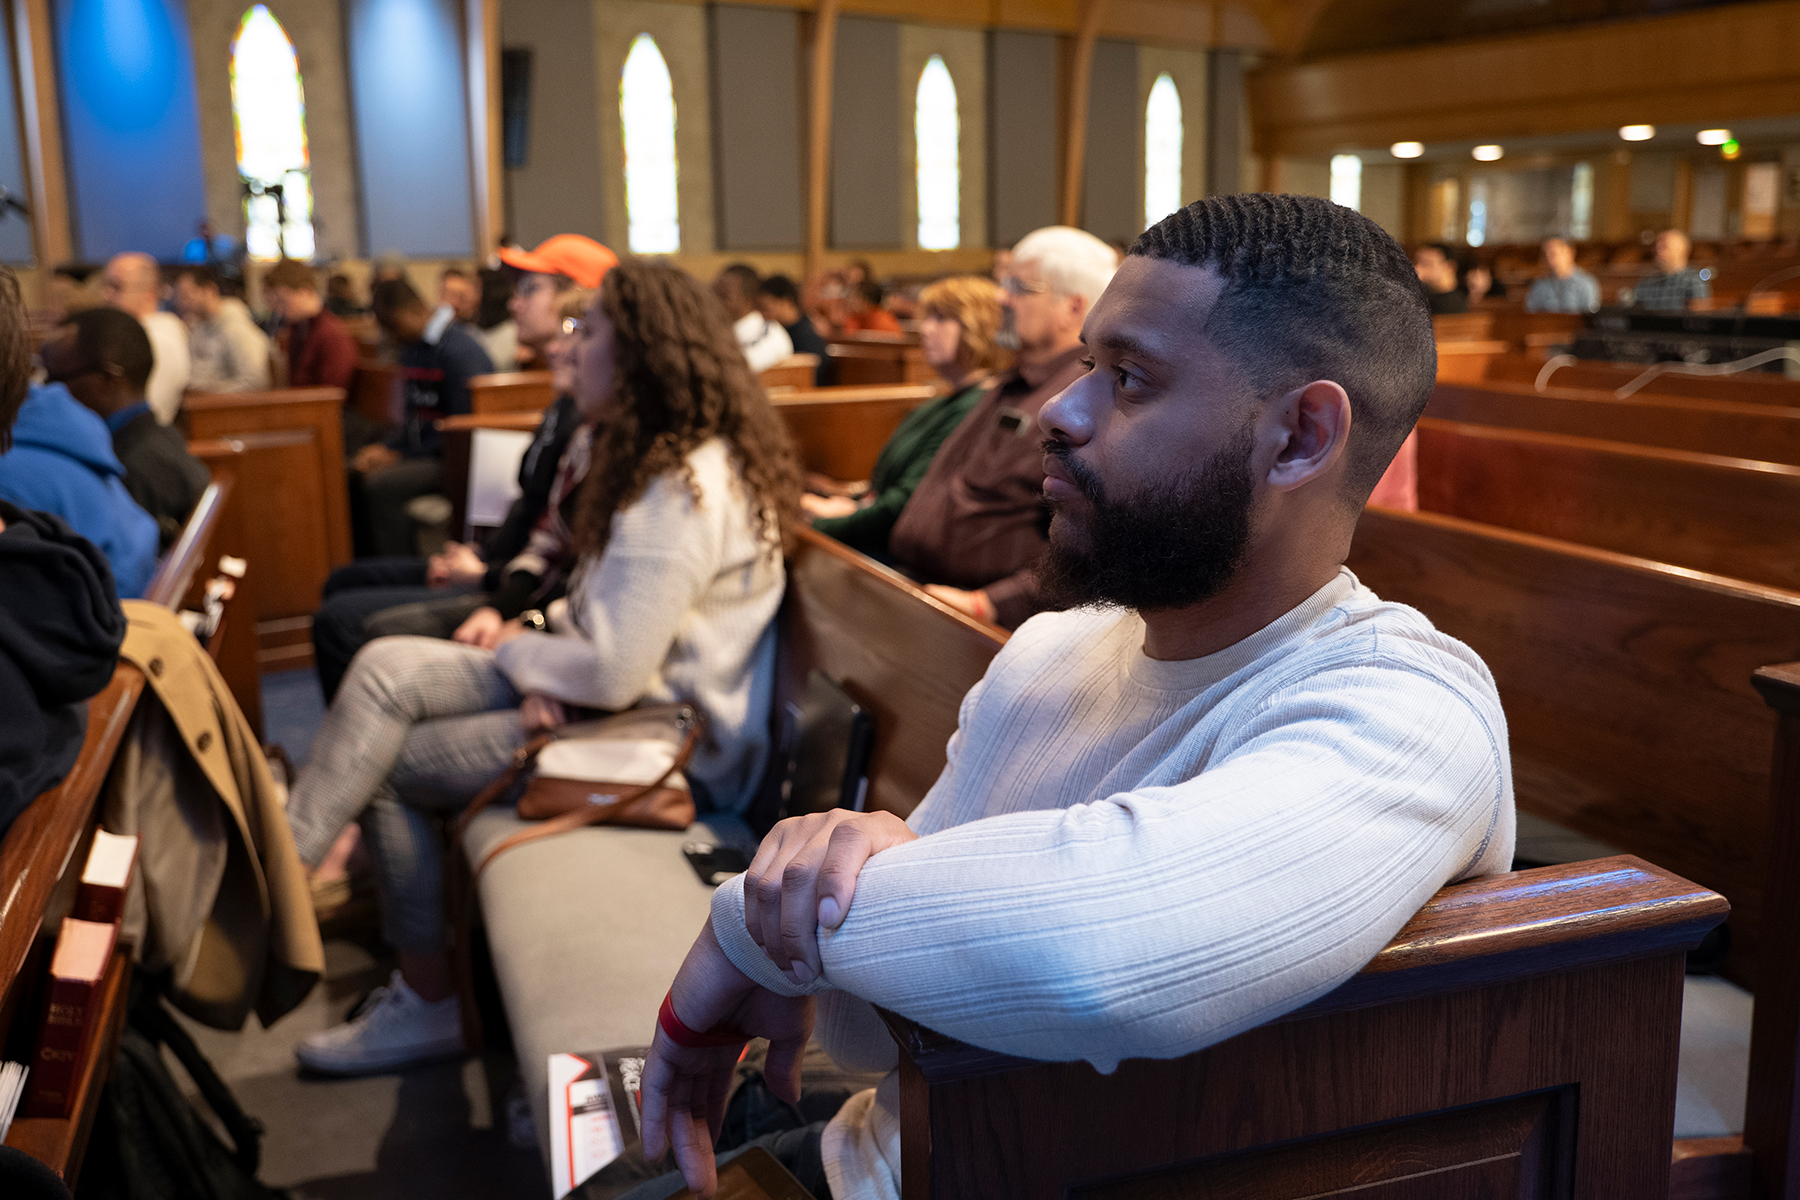 Young black man in the forefront, several people of other races and genders in the background sitting in a church.